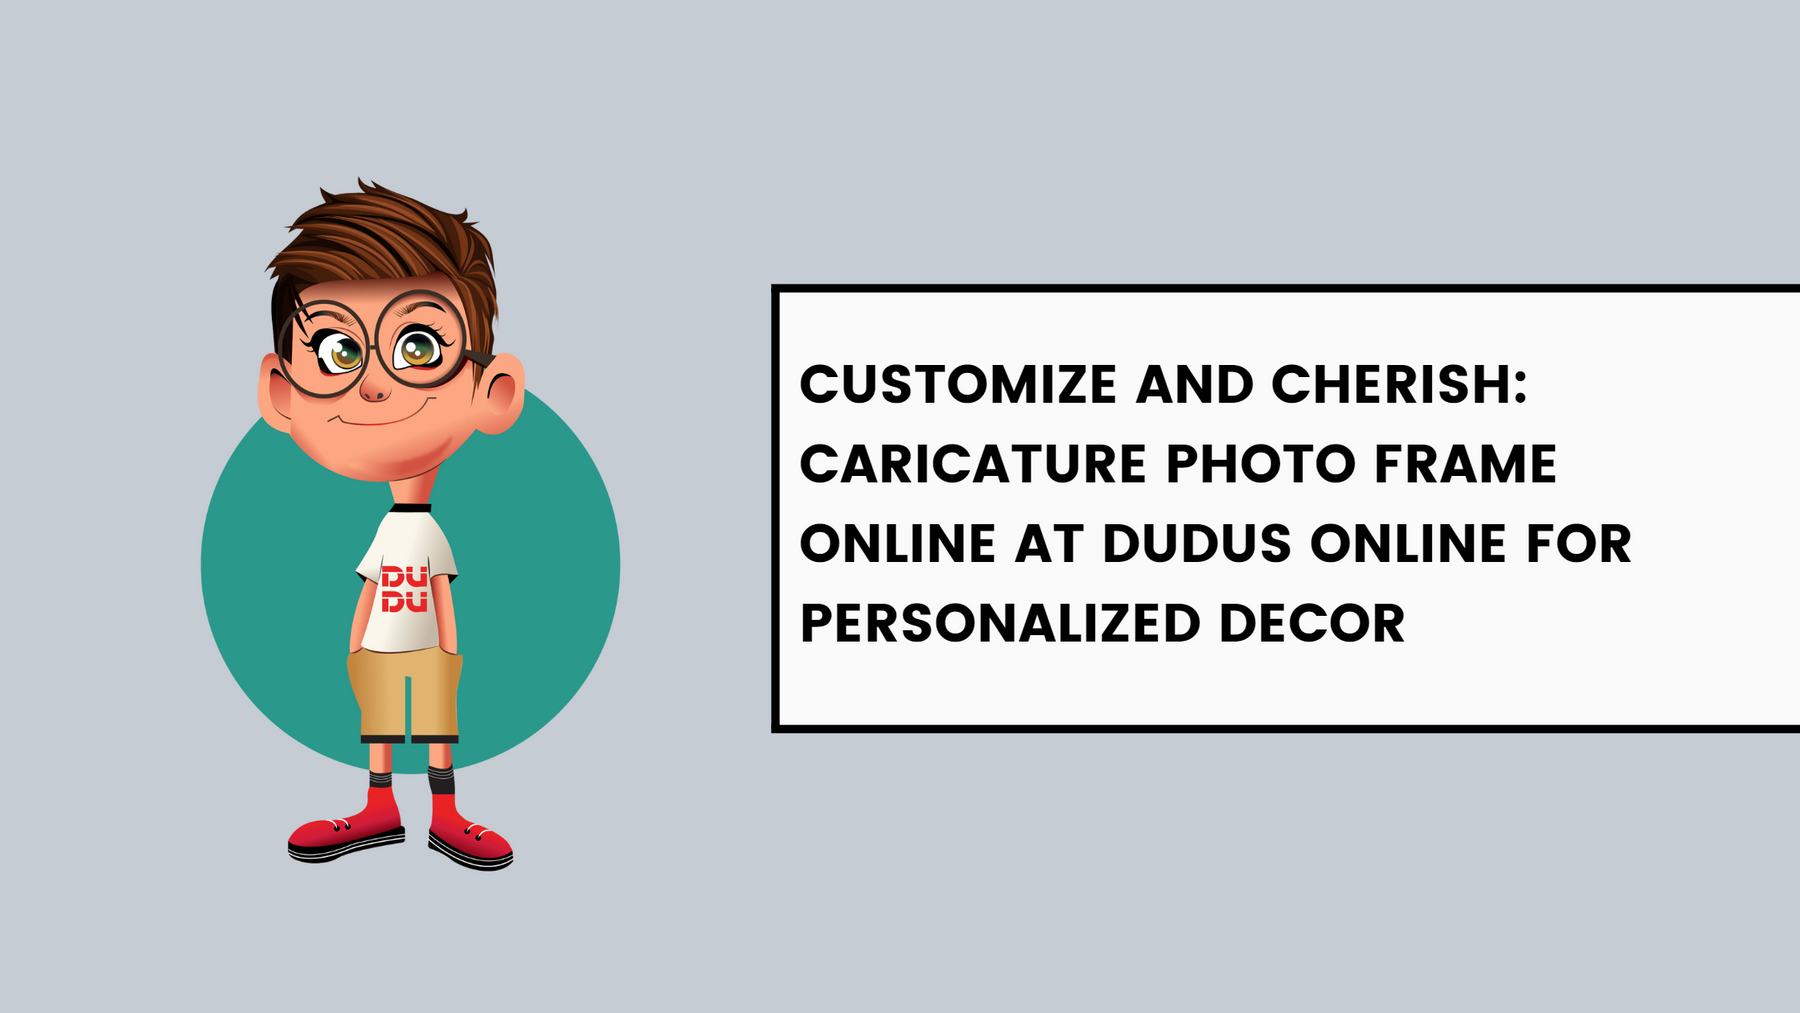 Customize And Cherish: Caricature Photo Frame Online At Dudus Online For Personalized Decor